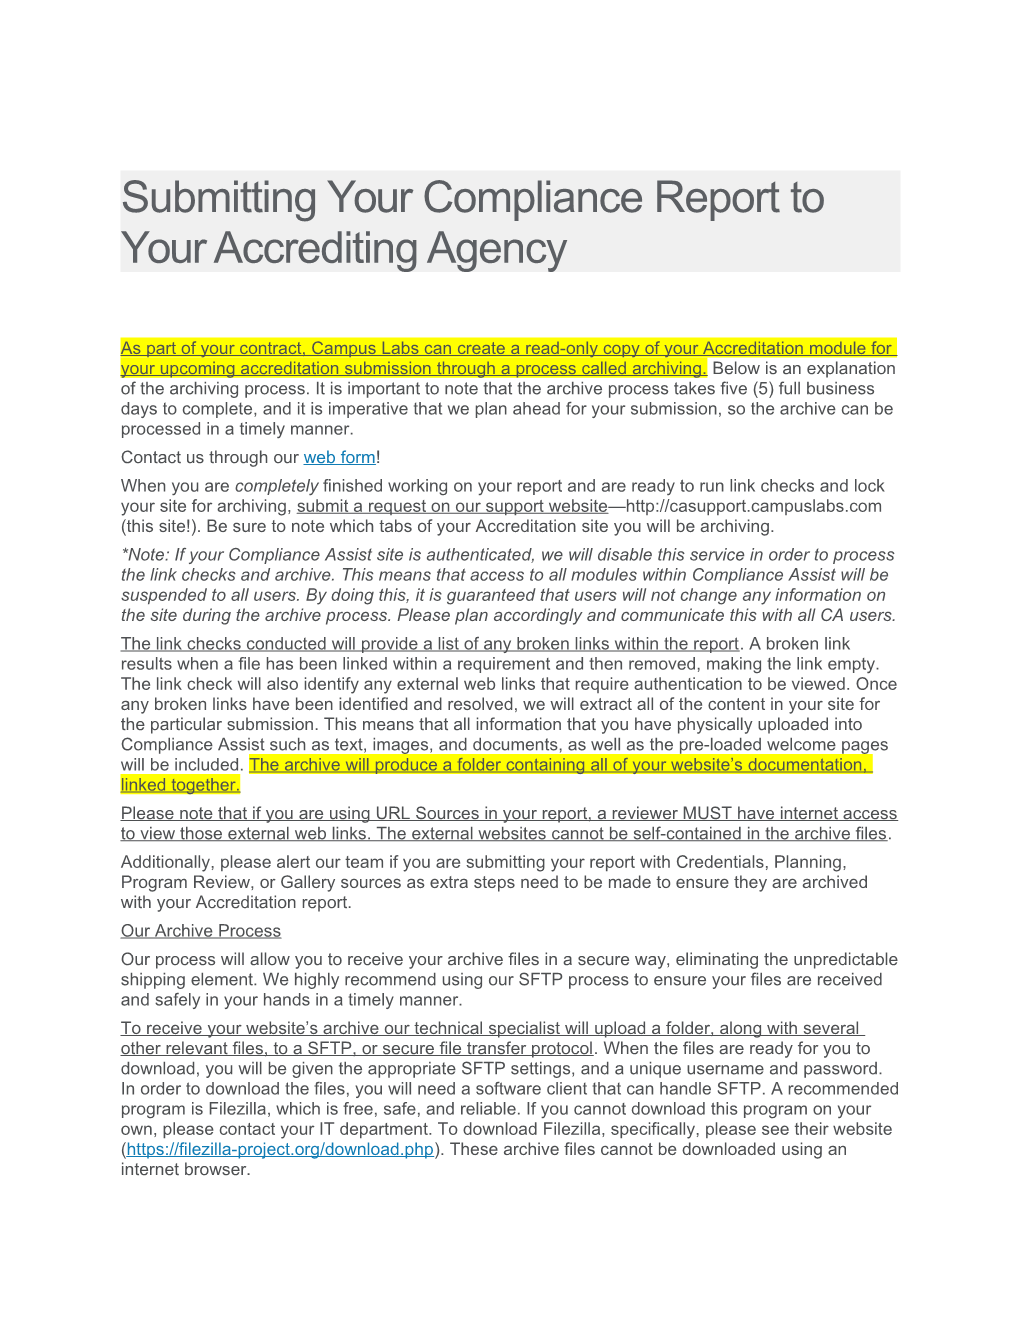 Submitting Your Compliance Report to Your Accrediting Agency